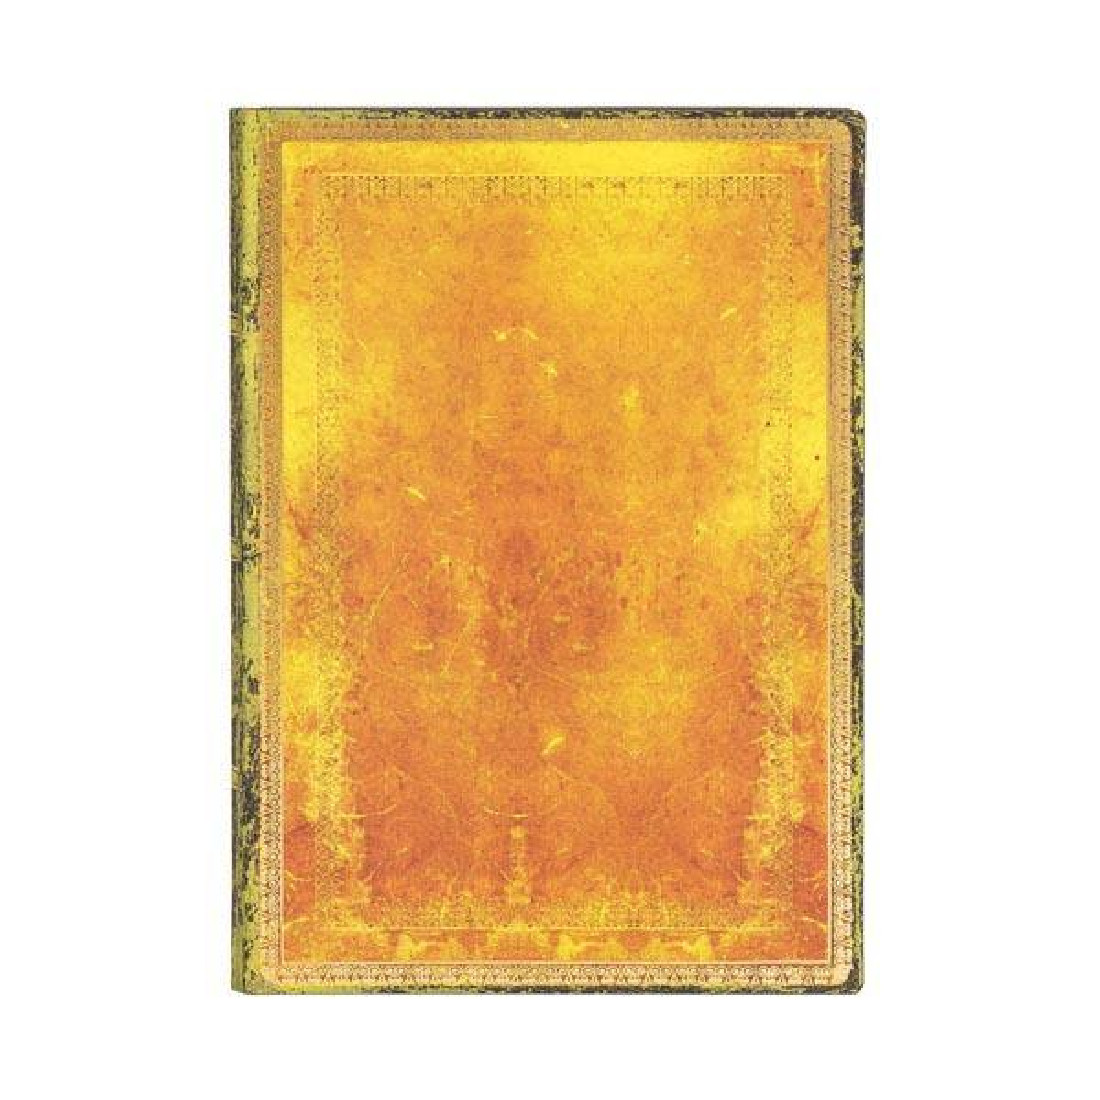 Notebook Flexi Midi Lined 13X18 (176 pages) Ochre Paperblanks